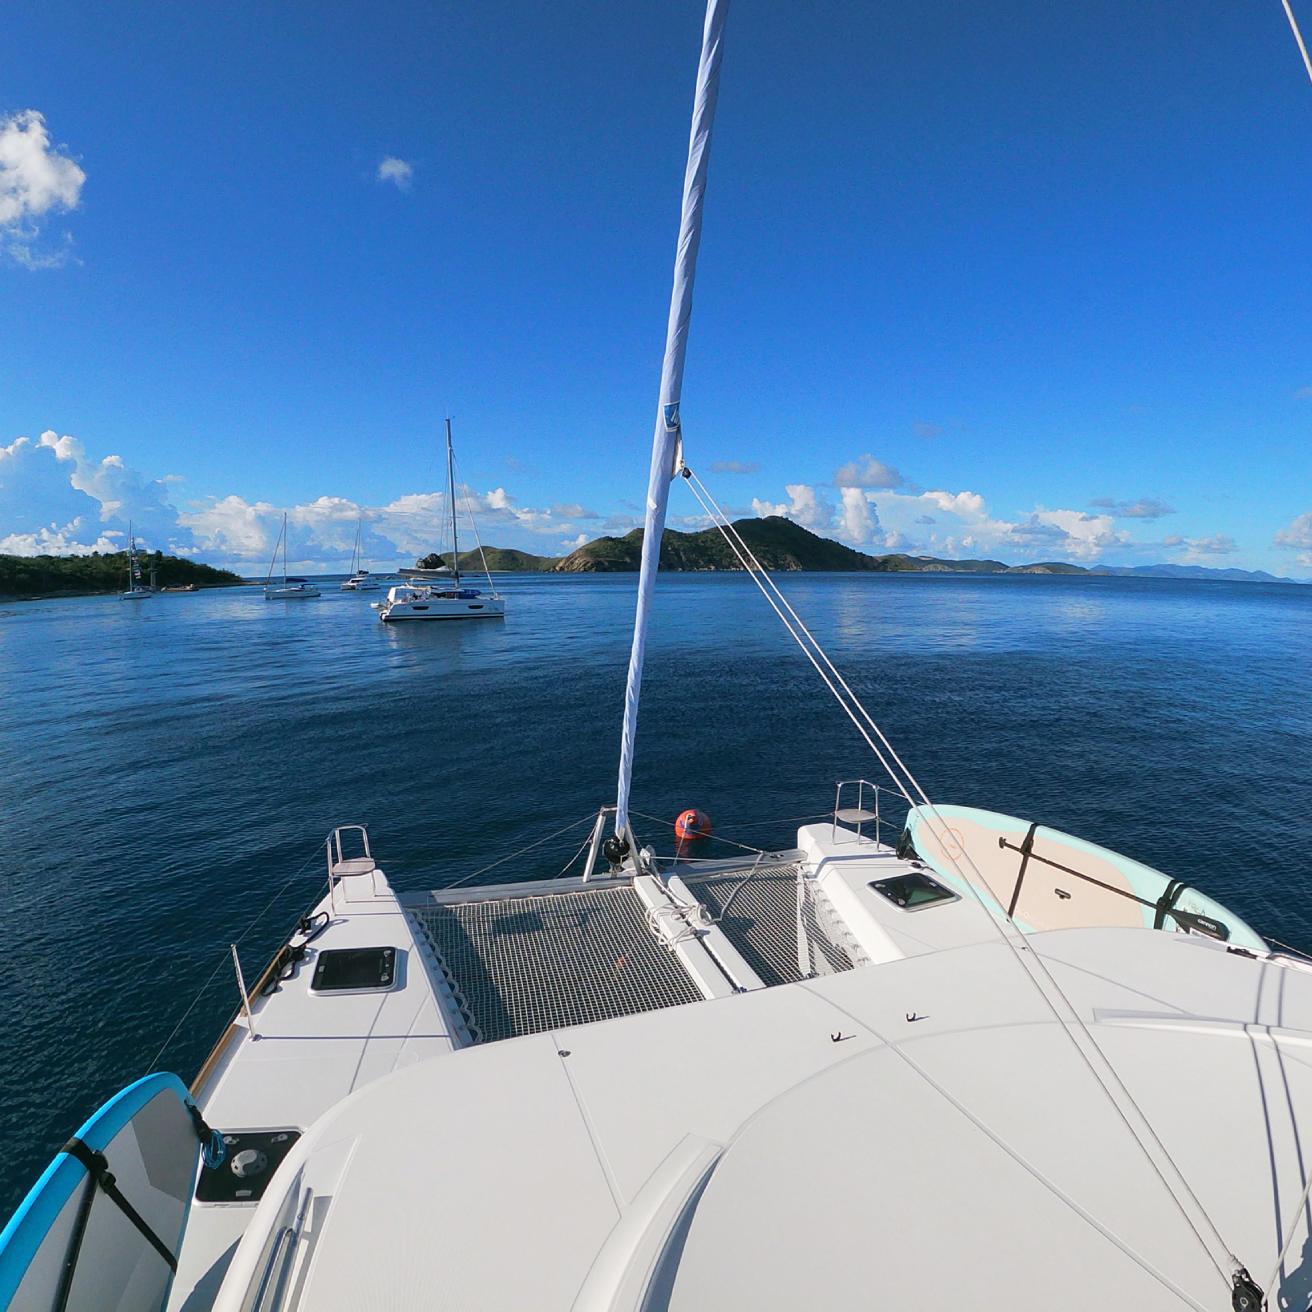 Cooper Island - Sailing time approx. 1.5 hours